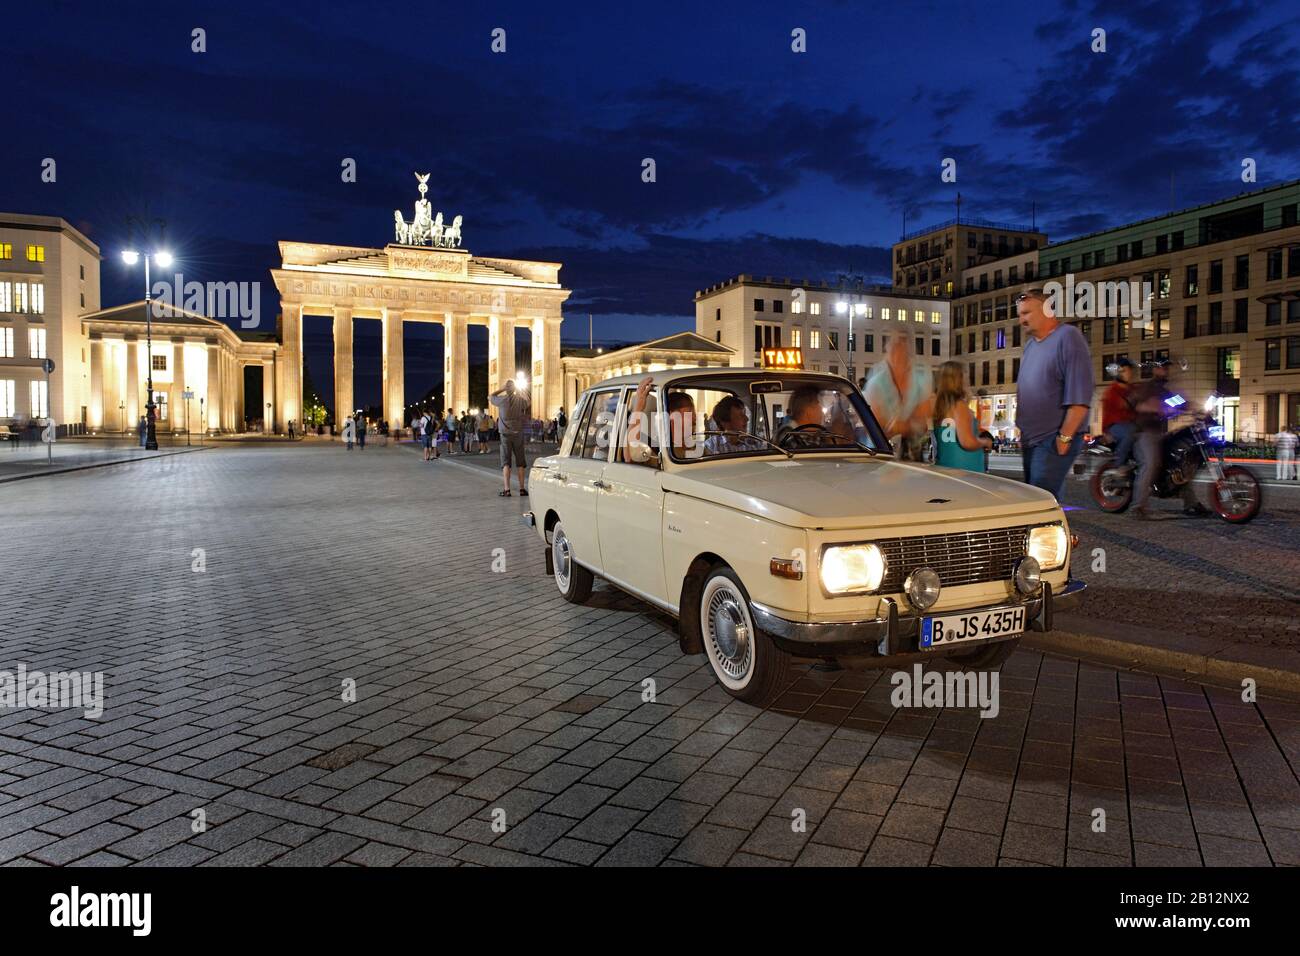 Wartburg 353 Deluxe,built in 1967,classic car,historic vehicle,taxi,Pariser Platz square,the Brandenburg Gate,government district,Berlin,Germany,Europe Stock Photo